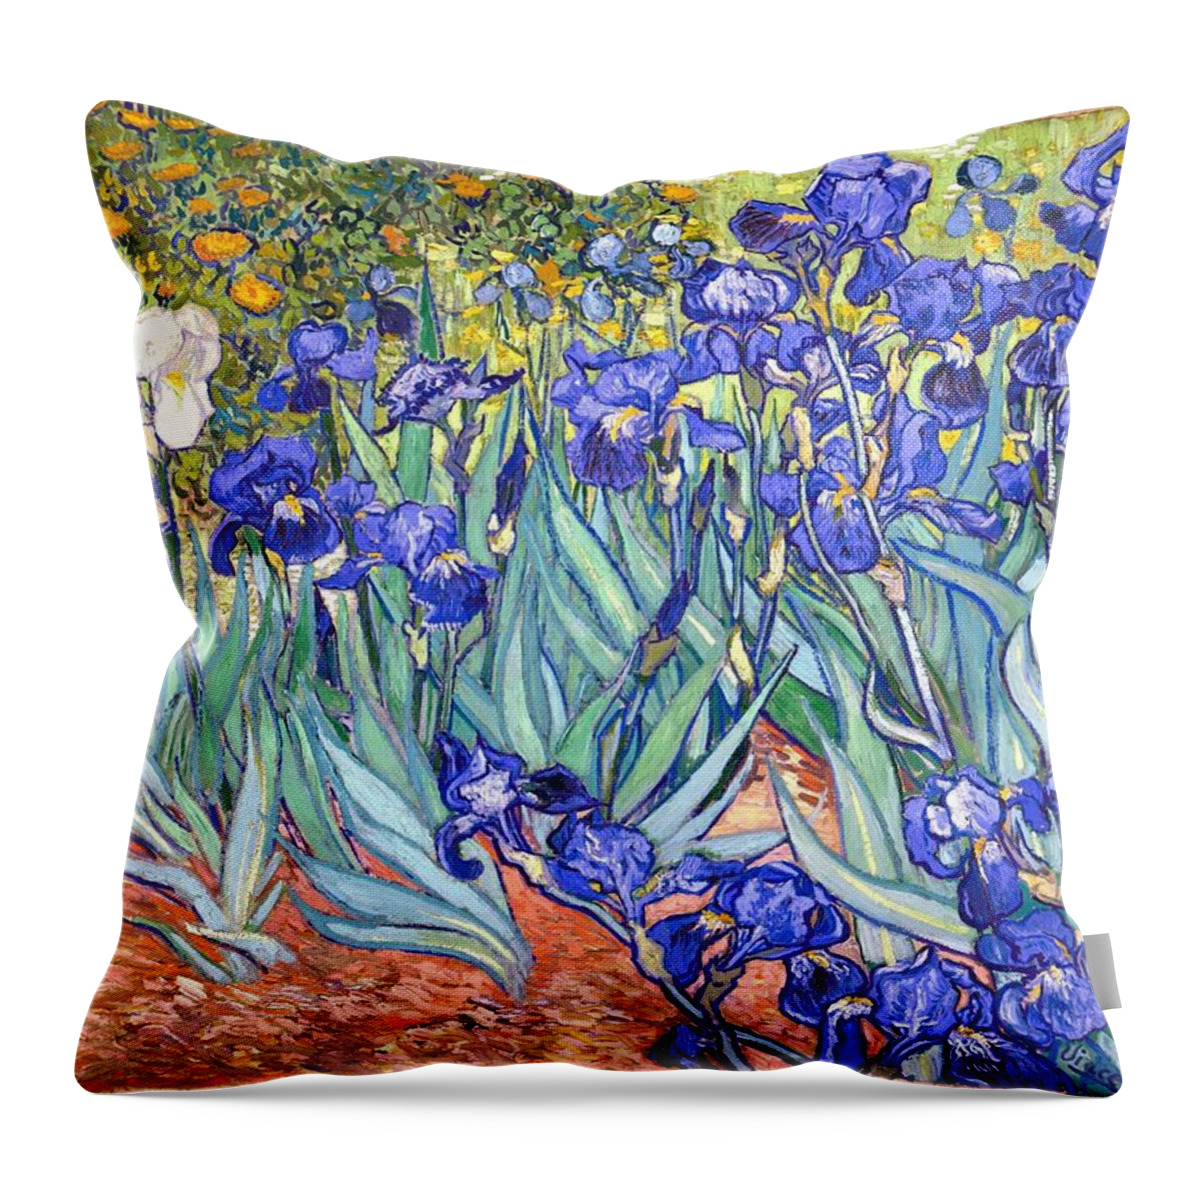 Van Gogh Throw Pillow featuring the painting Irises by Vincent Van Gogh